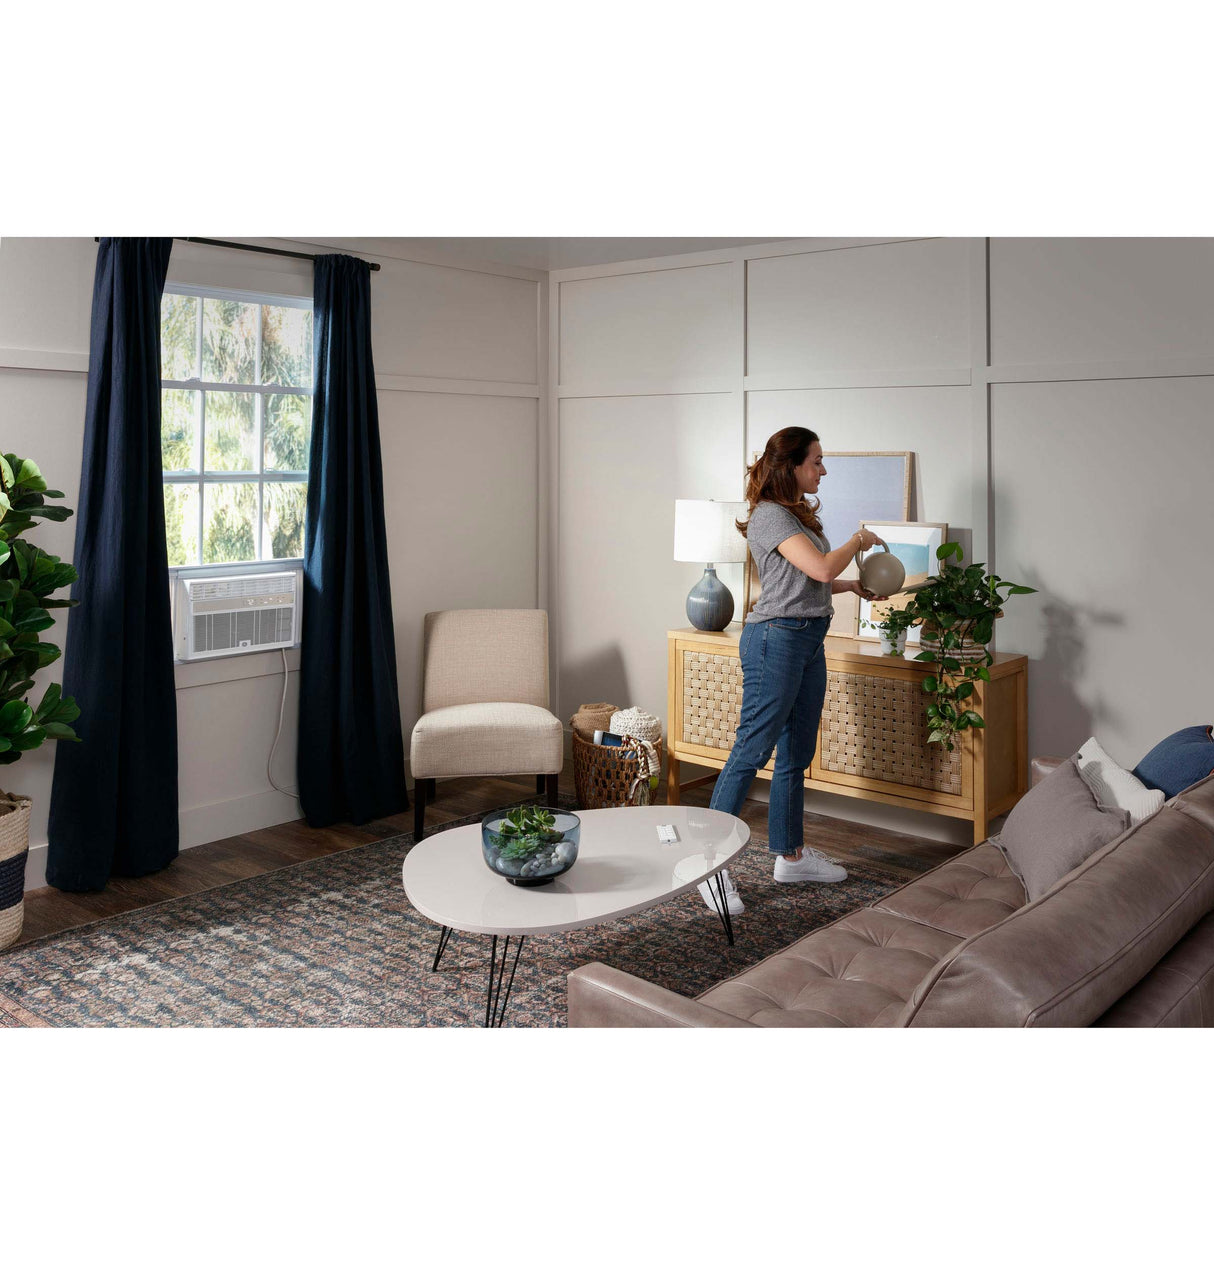 GE(R) ENERGY STAR(R) 8,000 BTU Smart Electronic Window Air Conditioner for Medium Rooms up to 350 sq. ft. - (AHY08LZ)